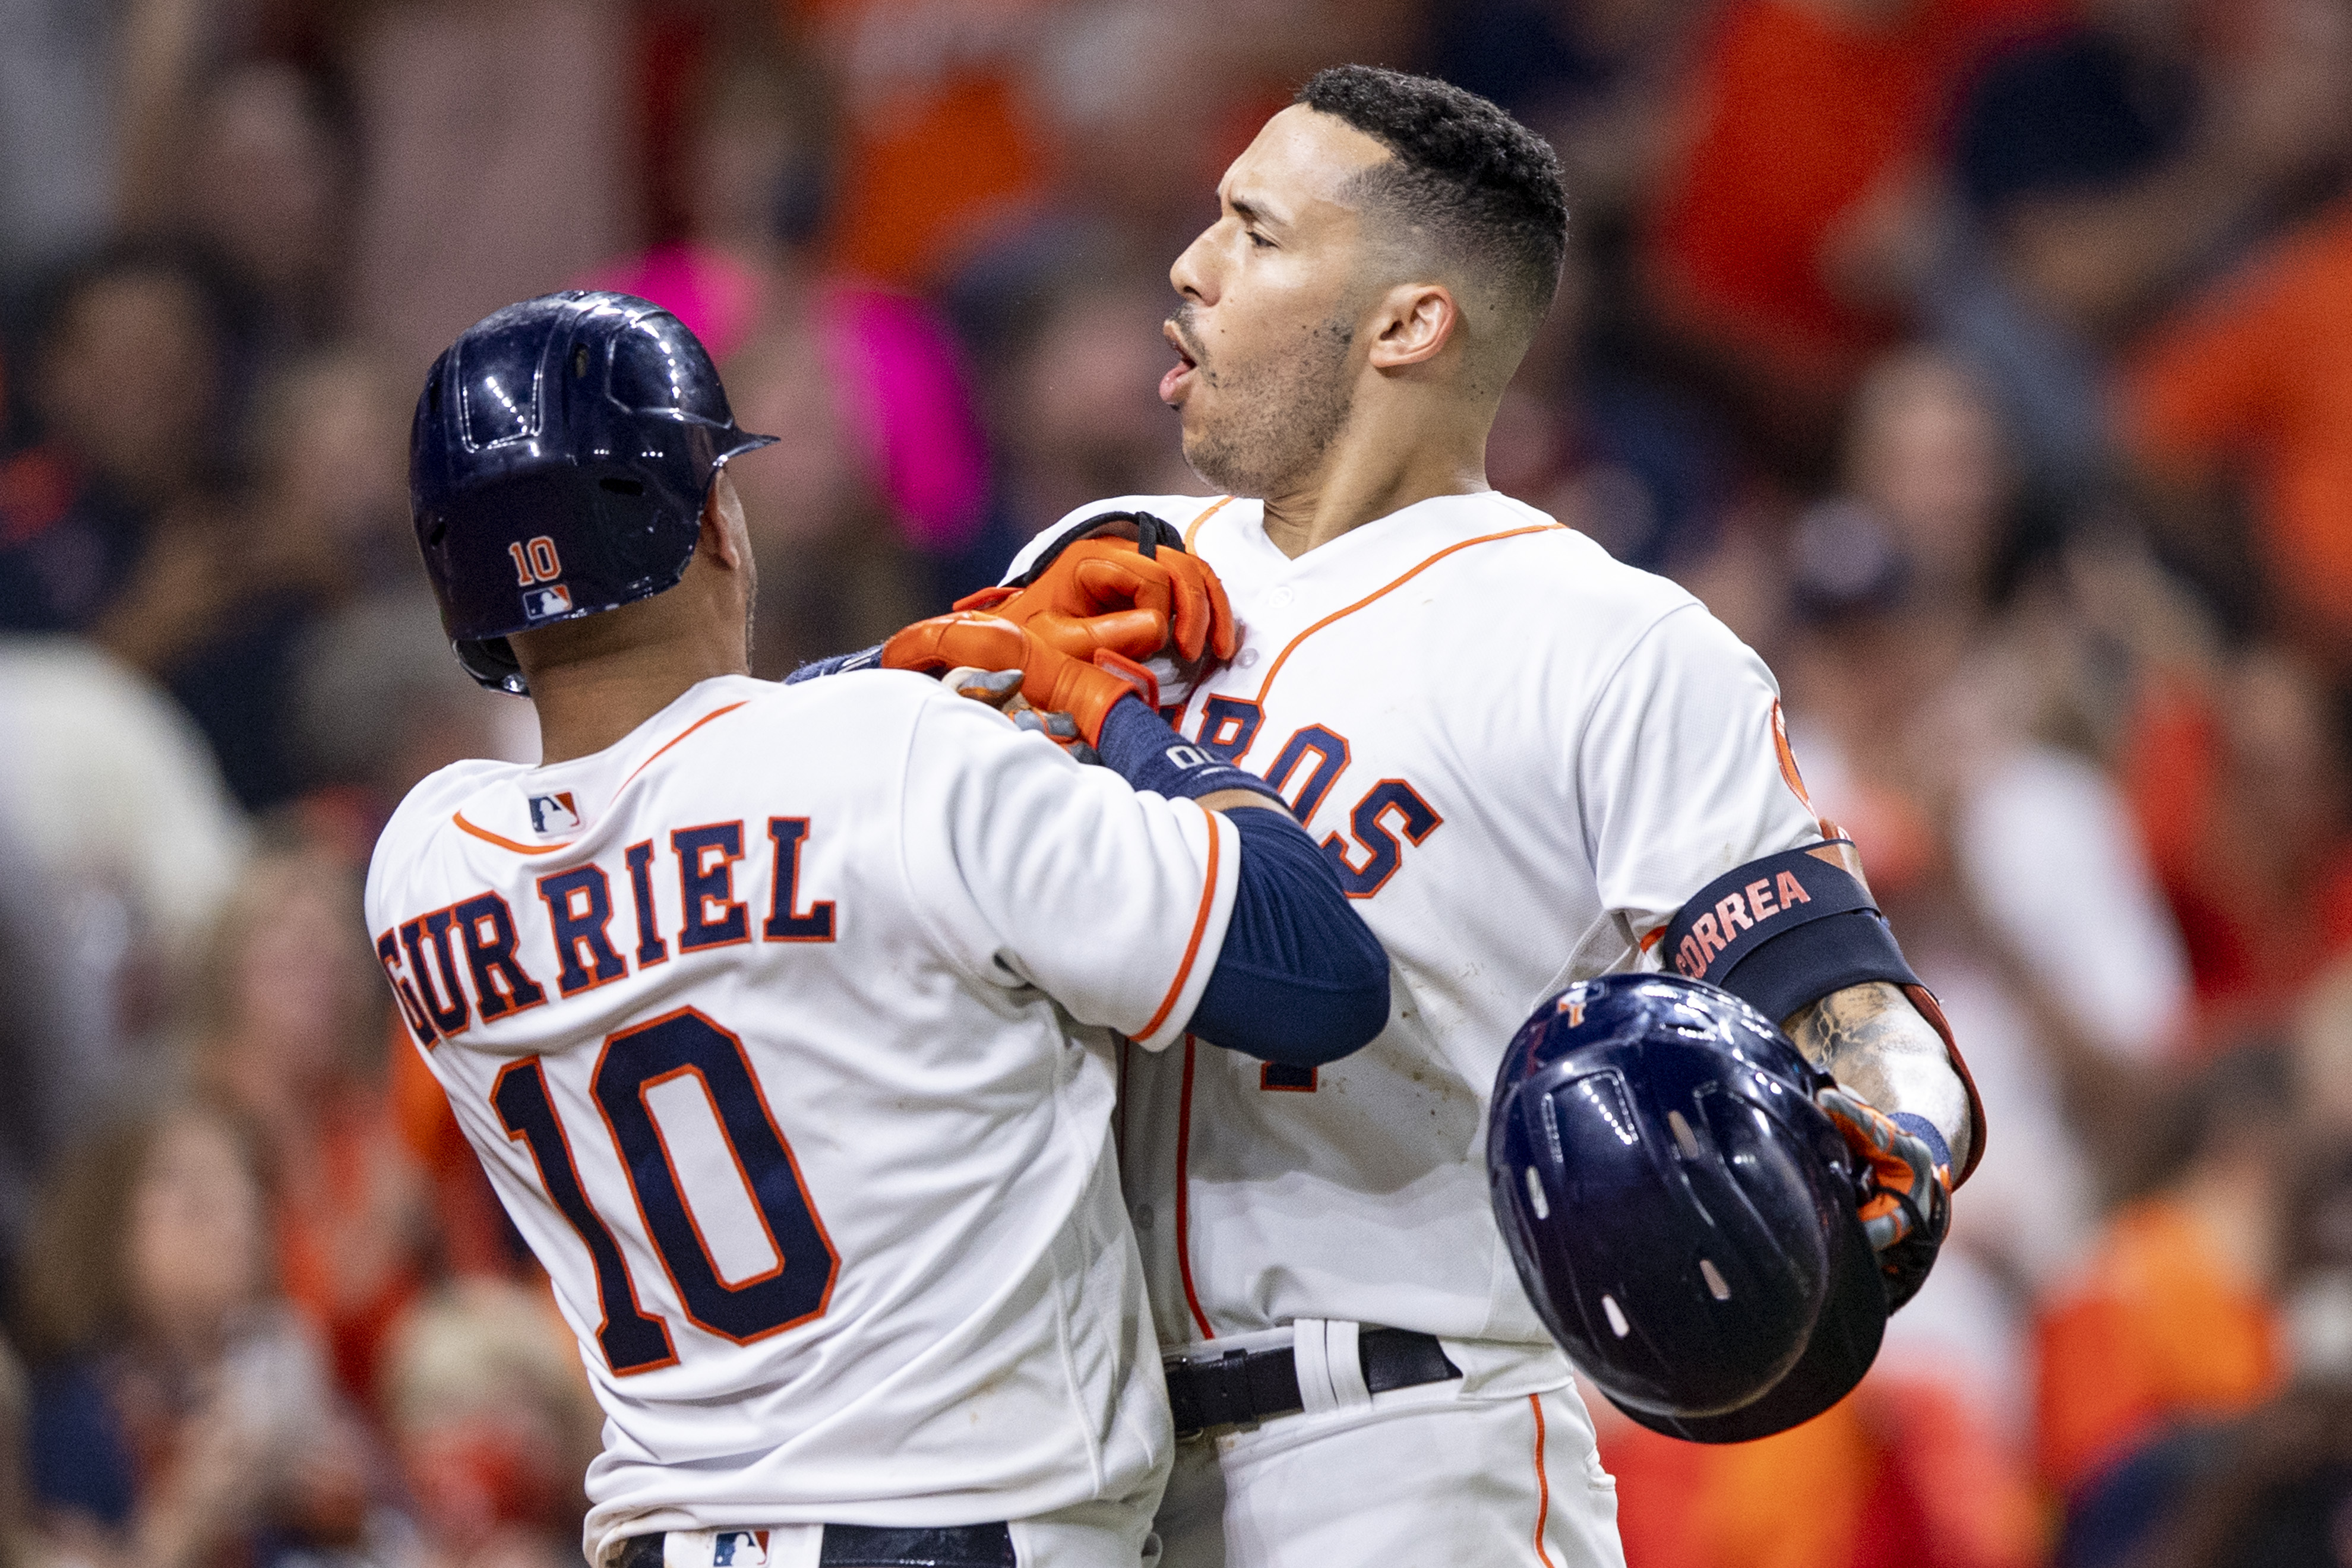 Carlos Correa's Mets deal hangs in the balance as three other